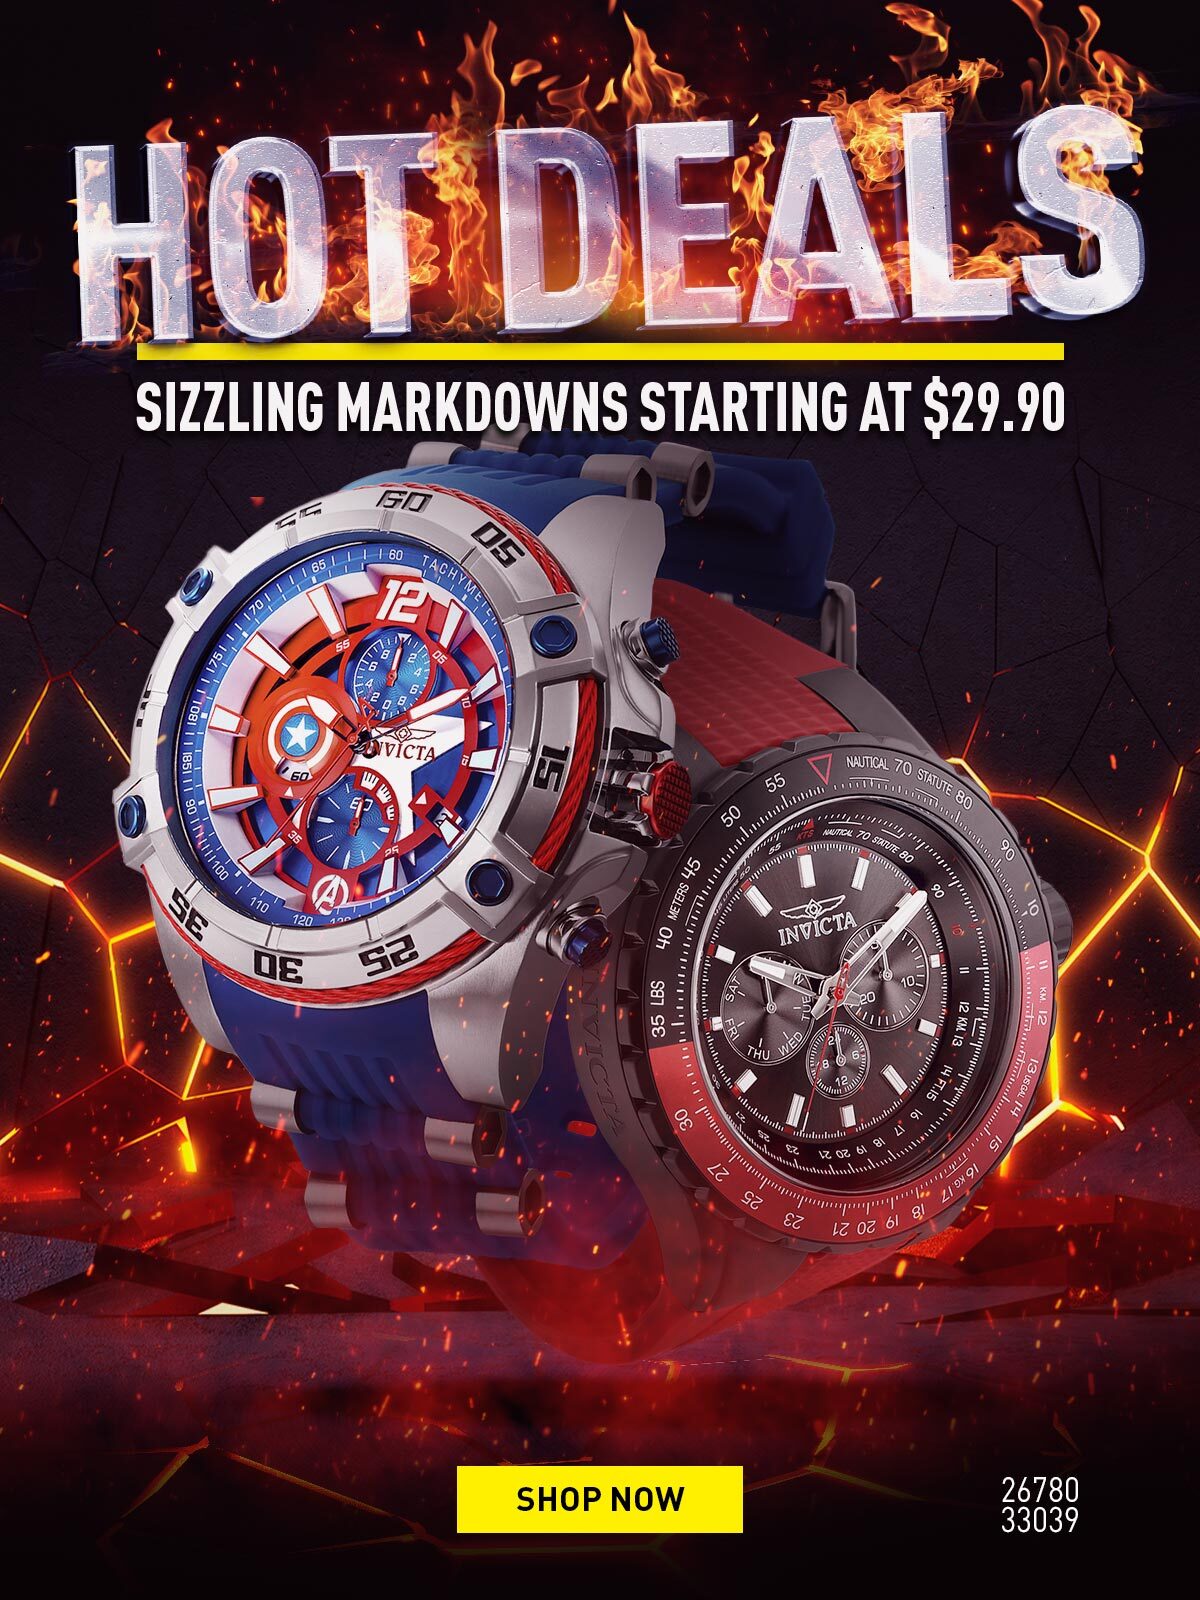 Hot Deals - Sizzling markdowns on top styles